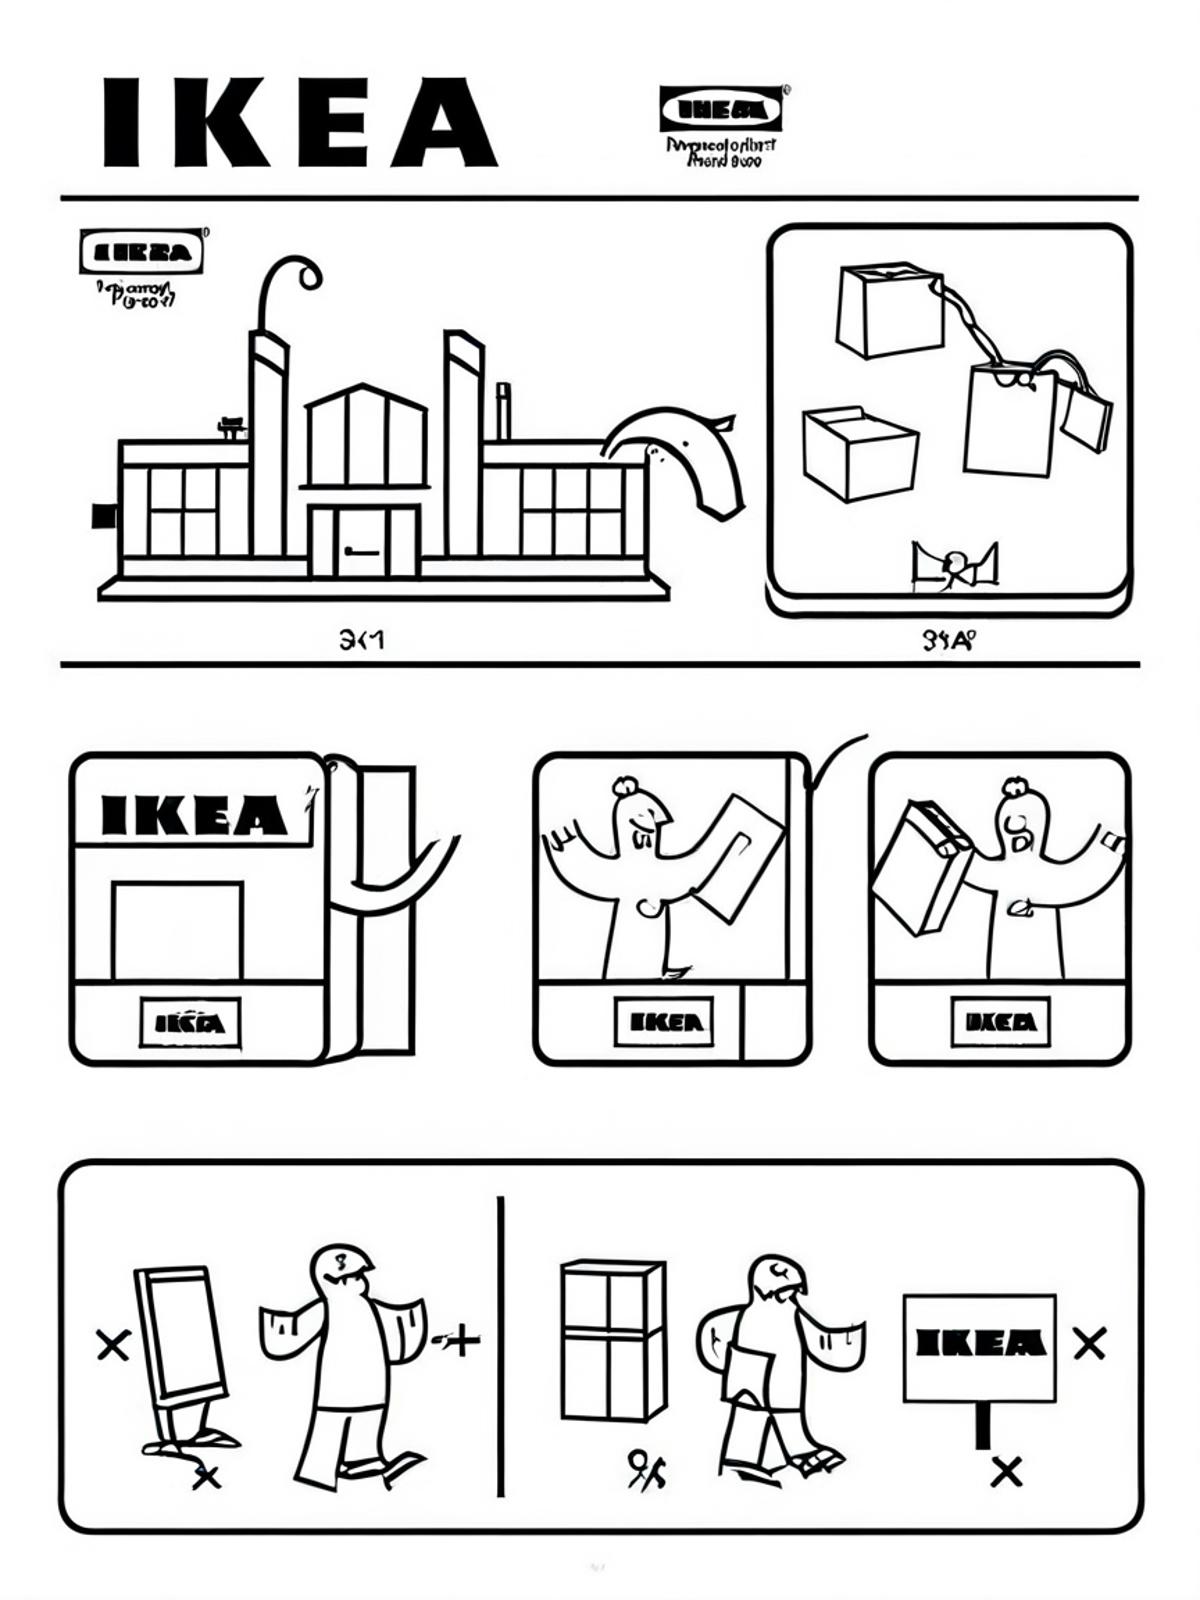 Ikea Instructions - LoRA - SDXL image by aiask